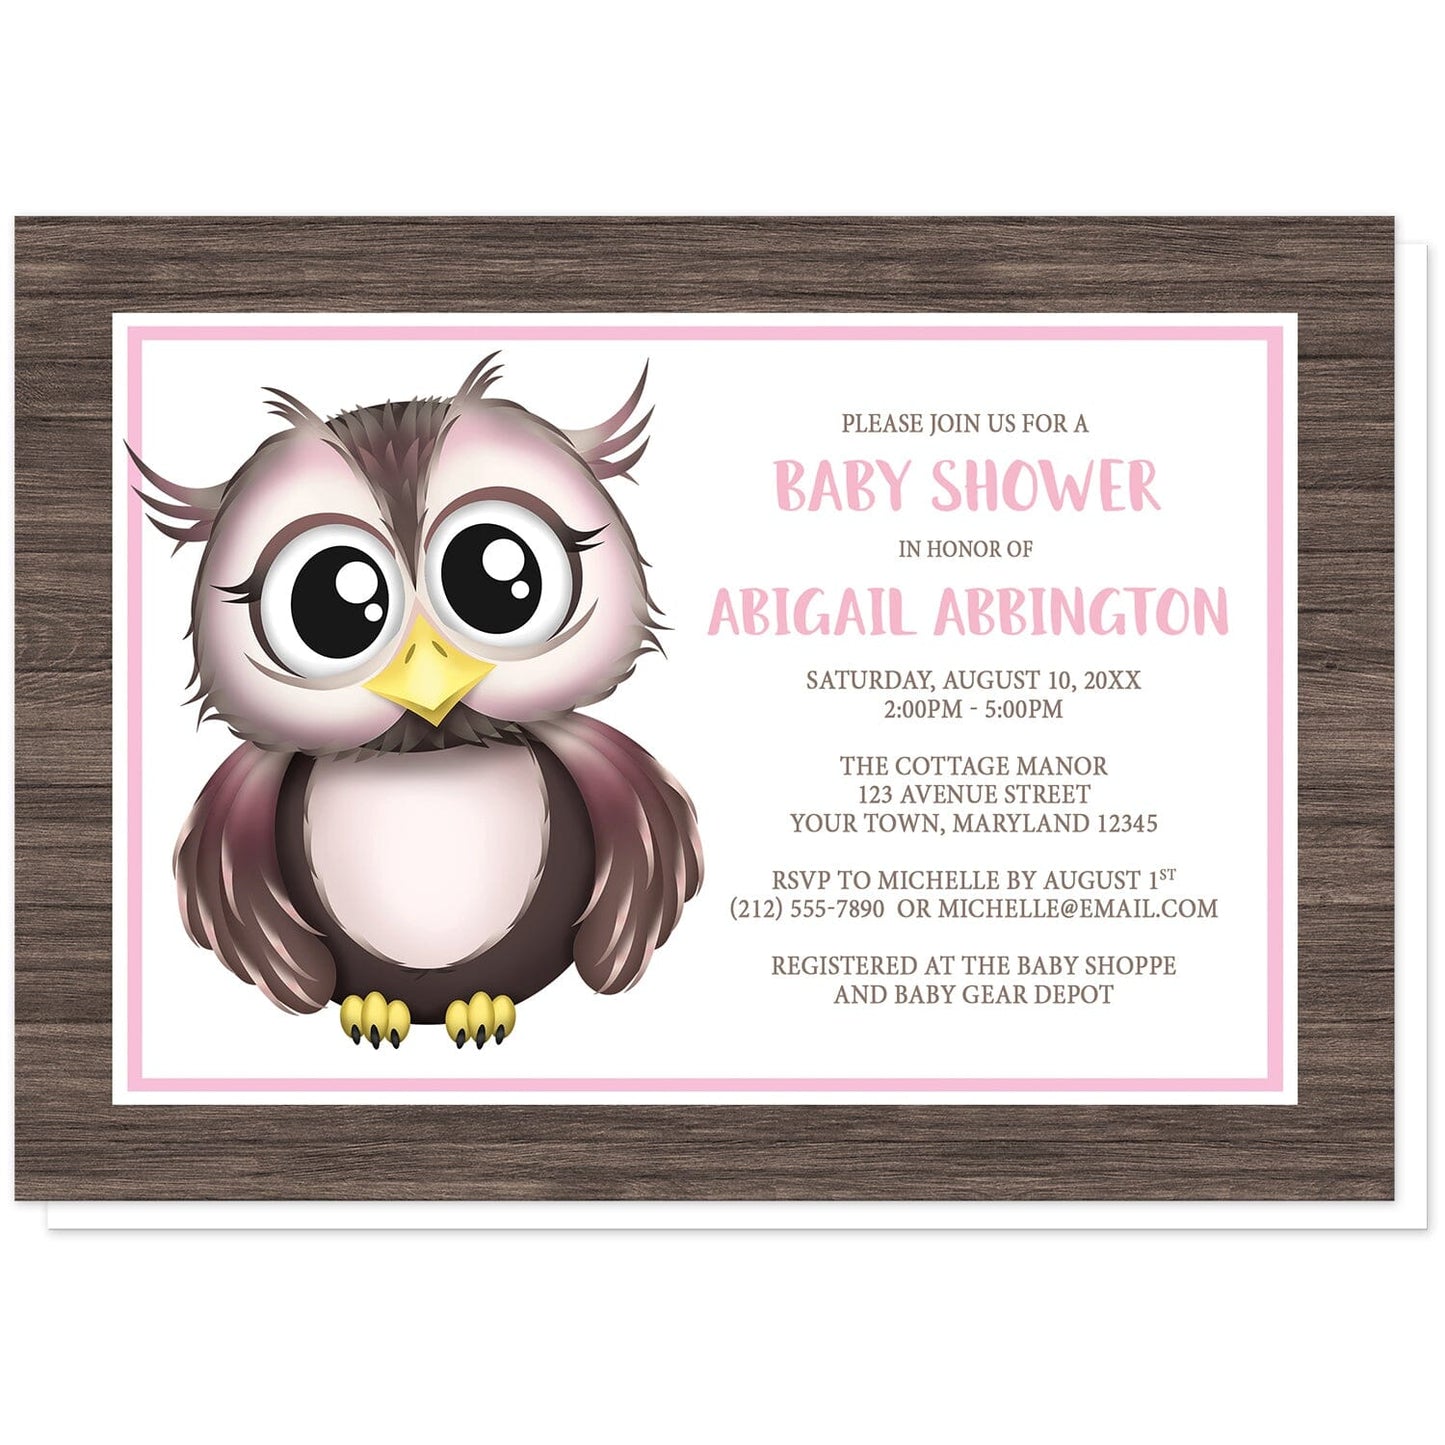 Adorable Owl Pink and Brown Baby Shower Invitations at Artistically Invited. Adorable owl pink and brown baby shower invitations with an illustration of a cute pink and brown owl and a rustic brown wood frame background design. This cute little owl stands inside a white rectangle outlined in pink and white. The personalized information you provide for your baby shower celebration will be printed in pink and brown over white. 